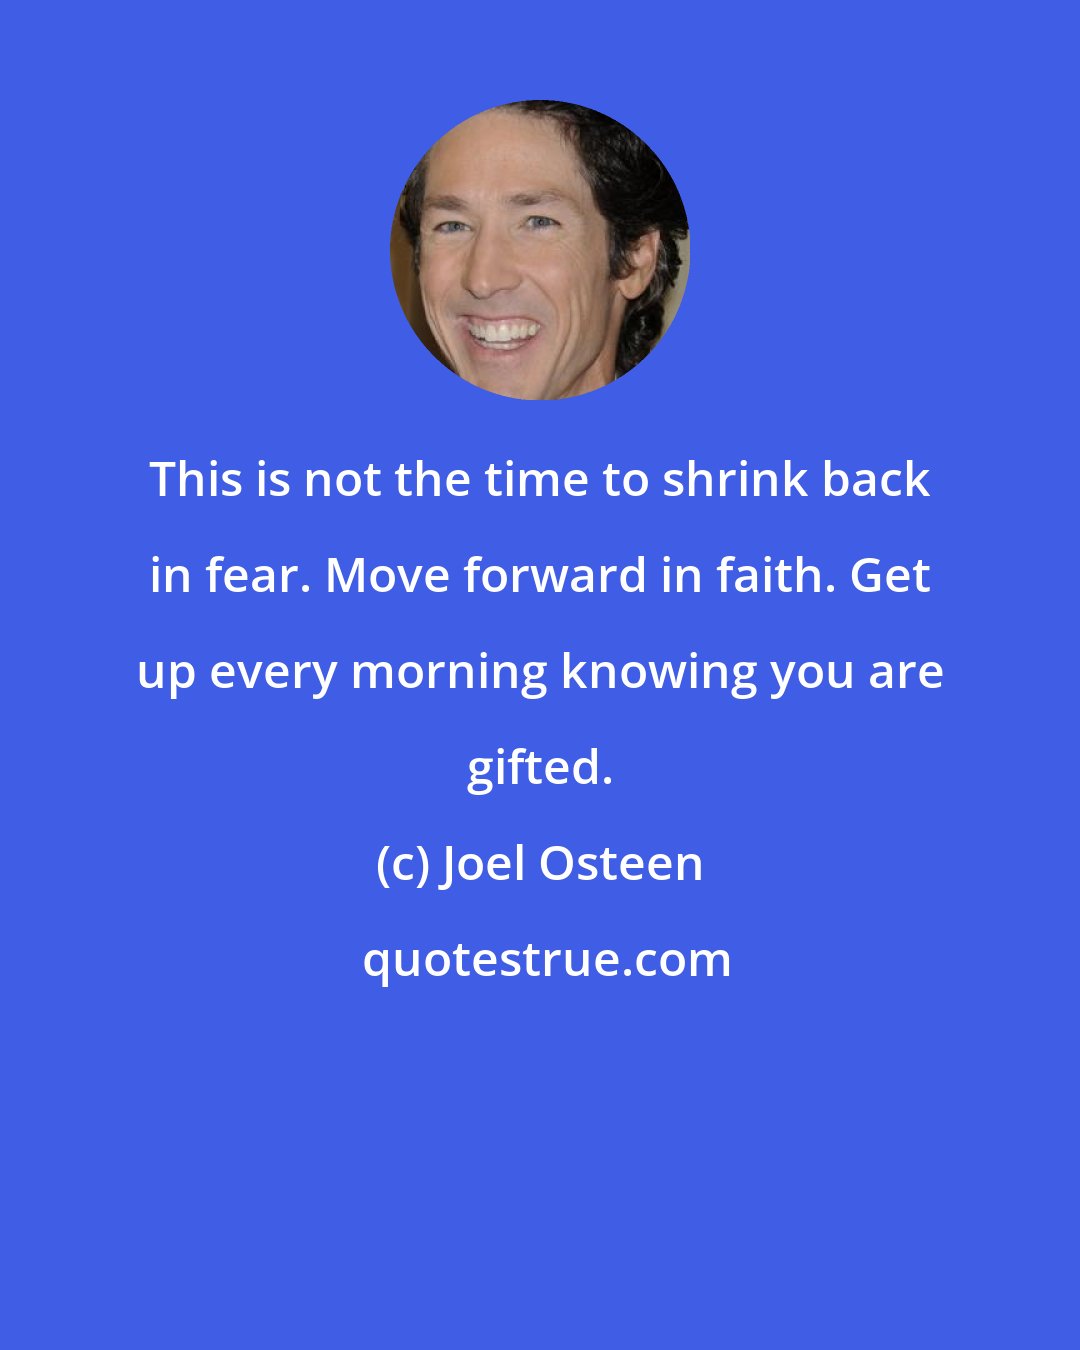 Joel Osteen: This is not the time to shrink back in fear. Move forward in faith. Get up every morning knowing you are gifted.